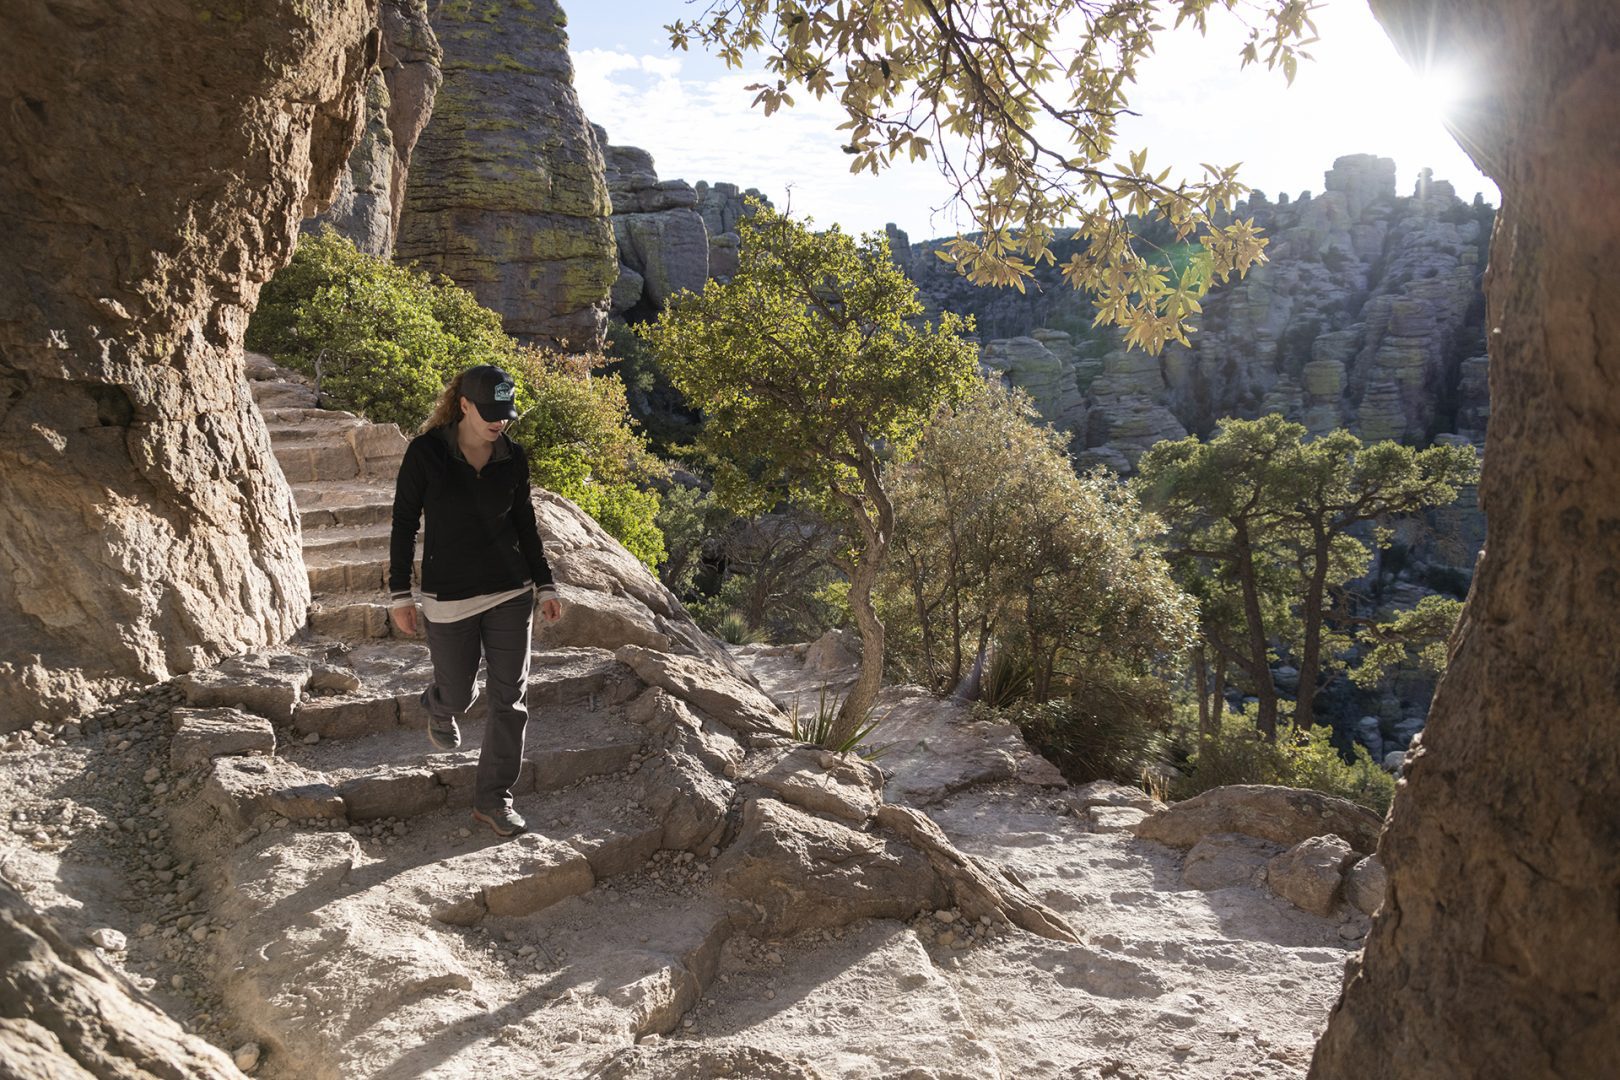 Hiker descends stone steps at Chiricahua National Monument with sunny sky in the background